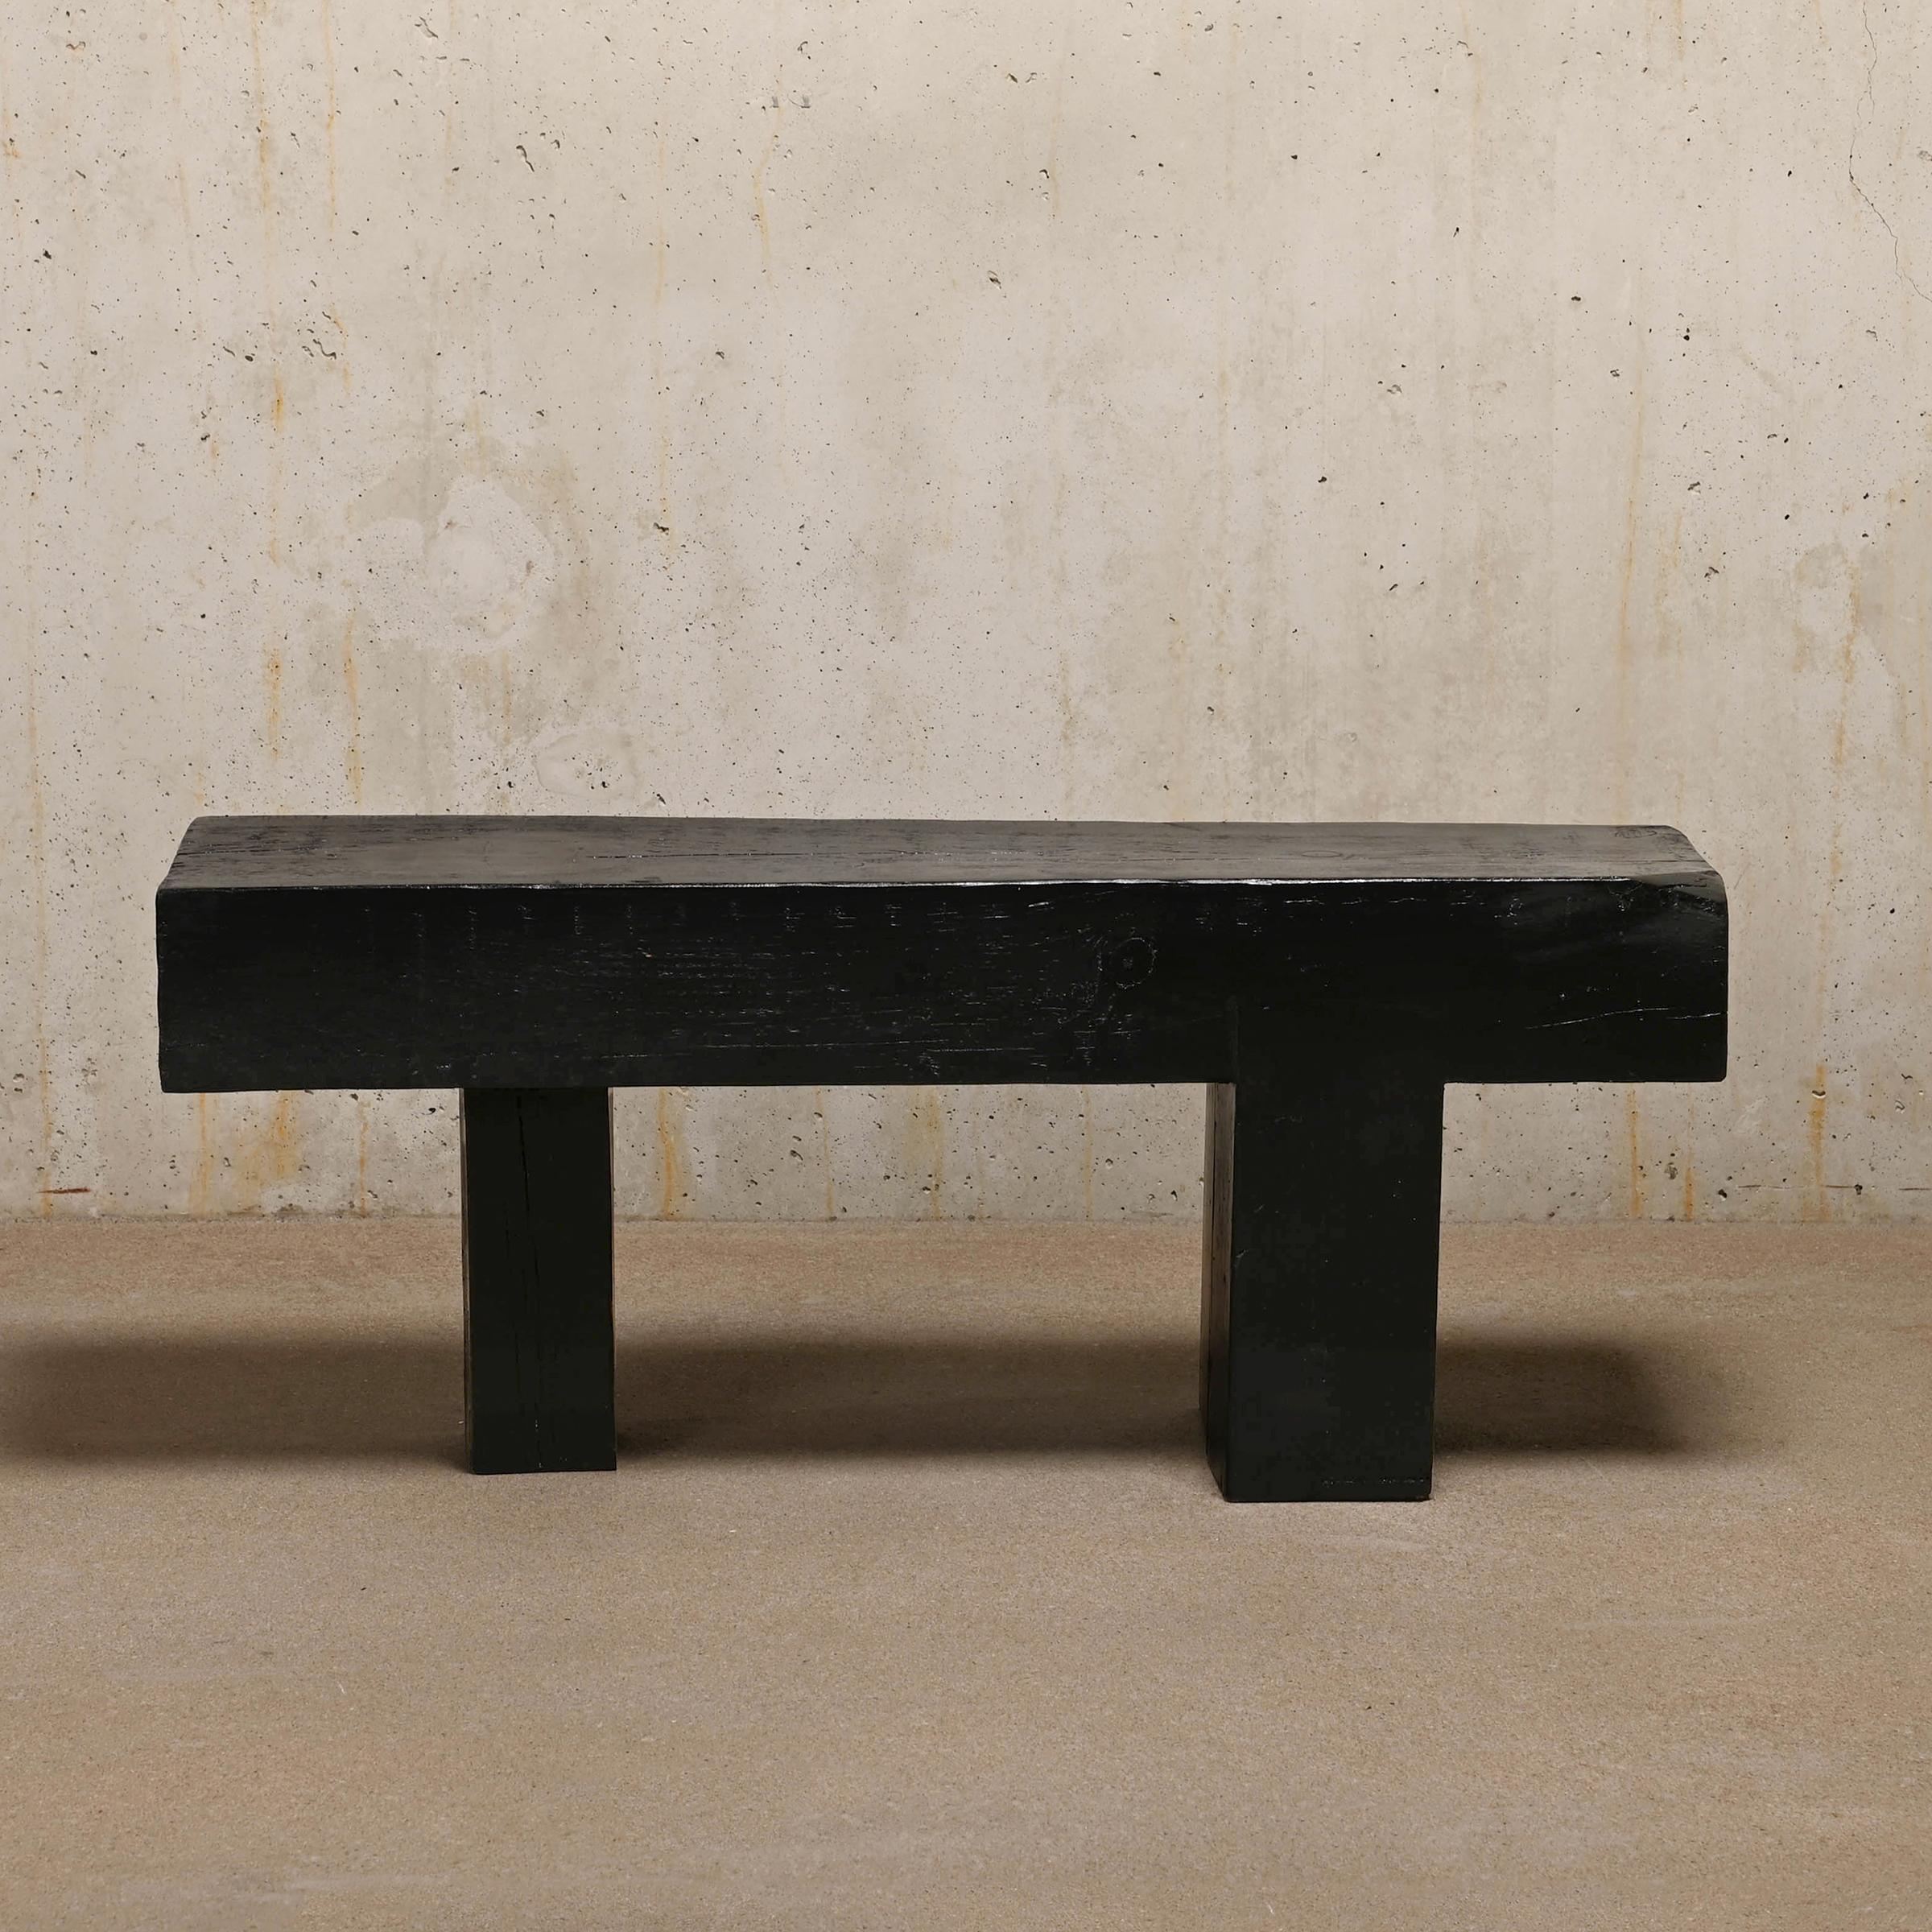 Contemporary Decorative and Graphical Bench or Side Table in Black Stained Solid Pine Wood For Sale